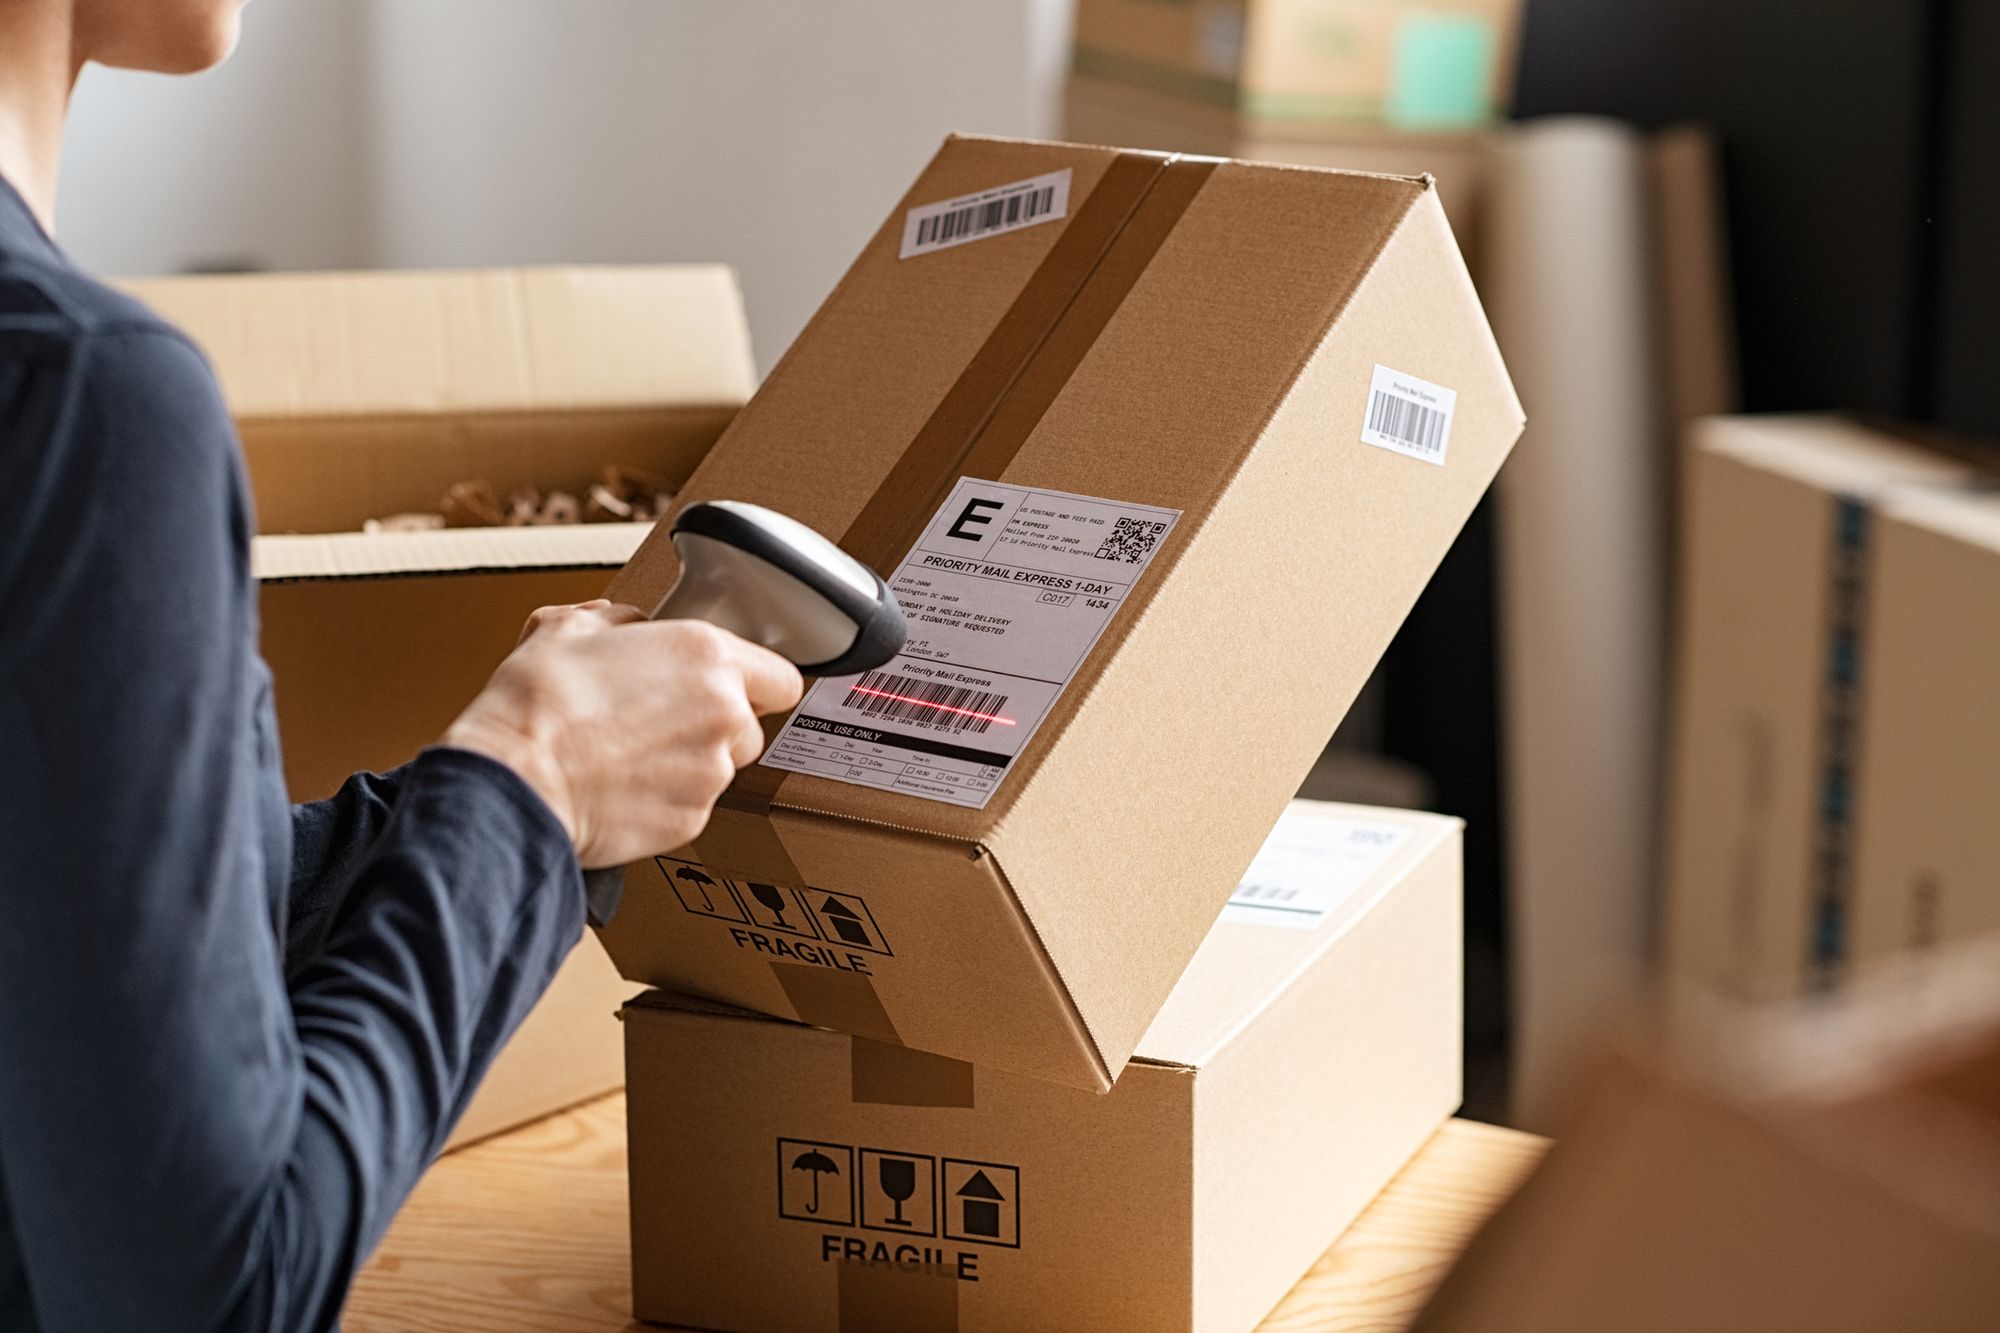 An employee scanning a barcode on a box using a barcode scanner